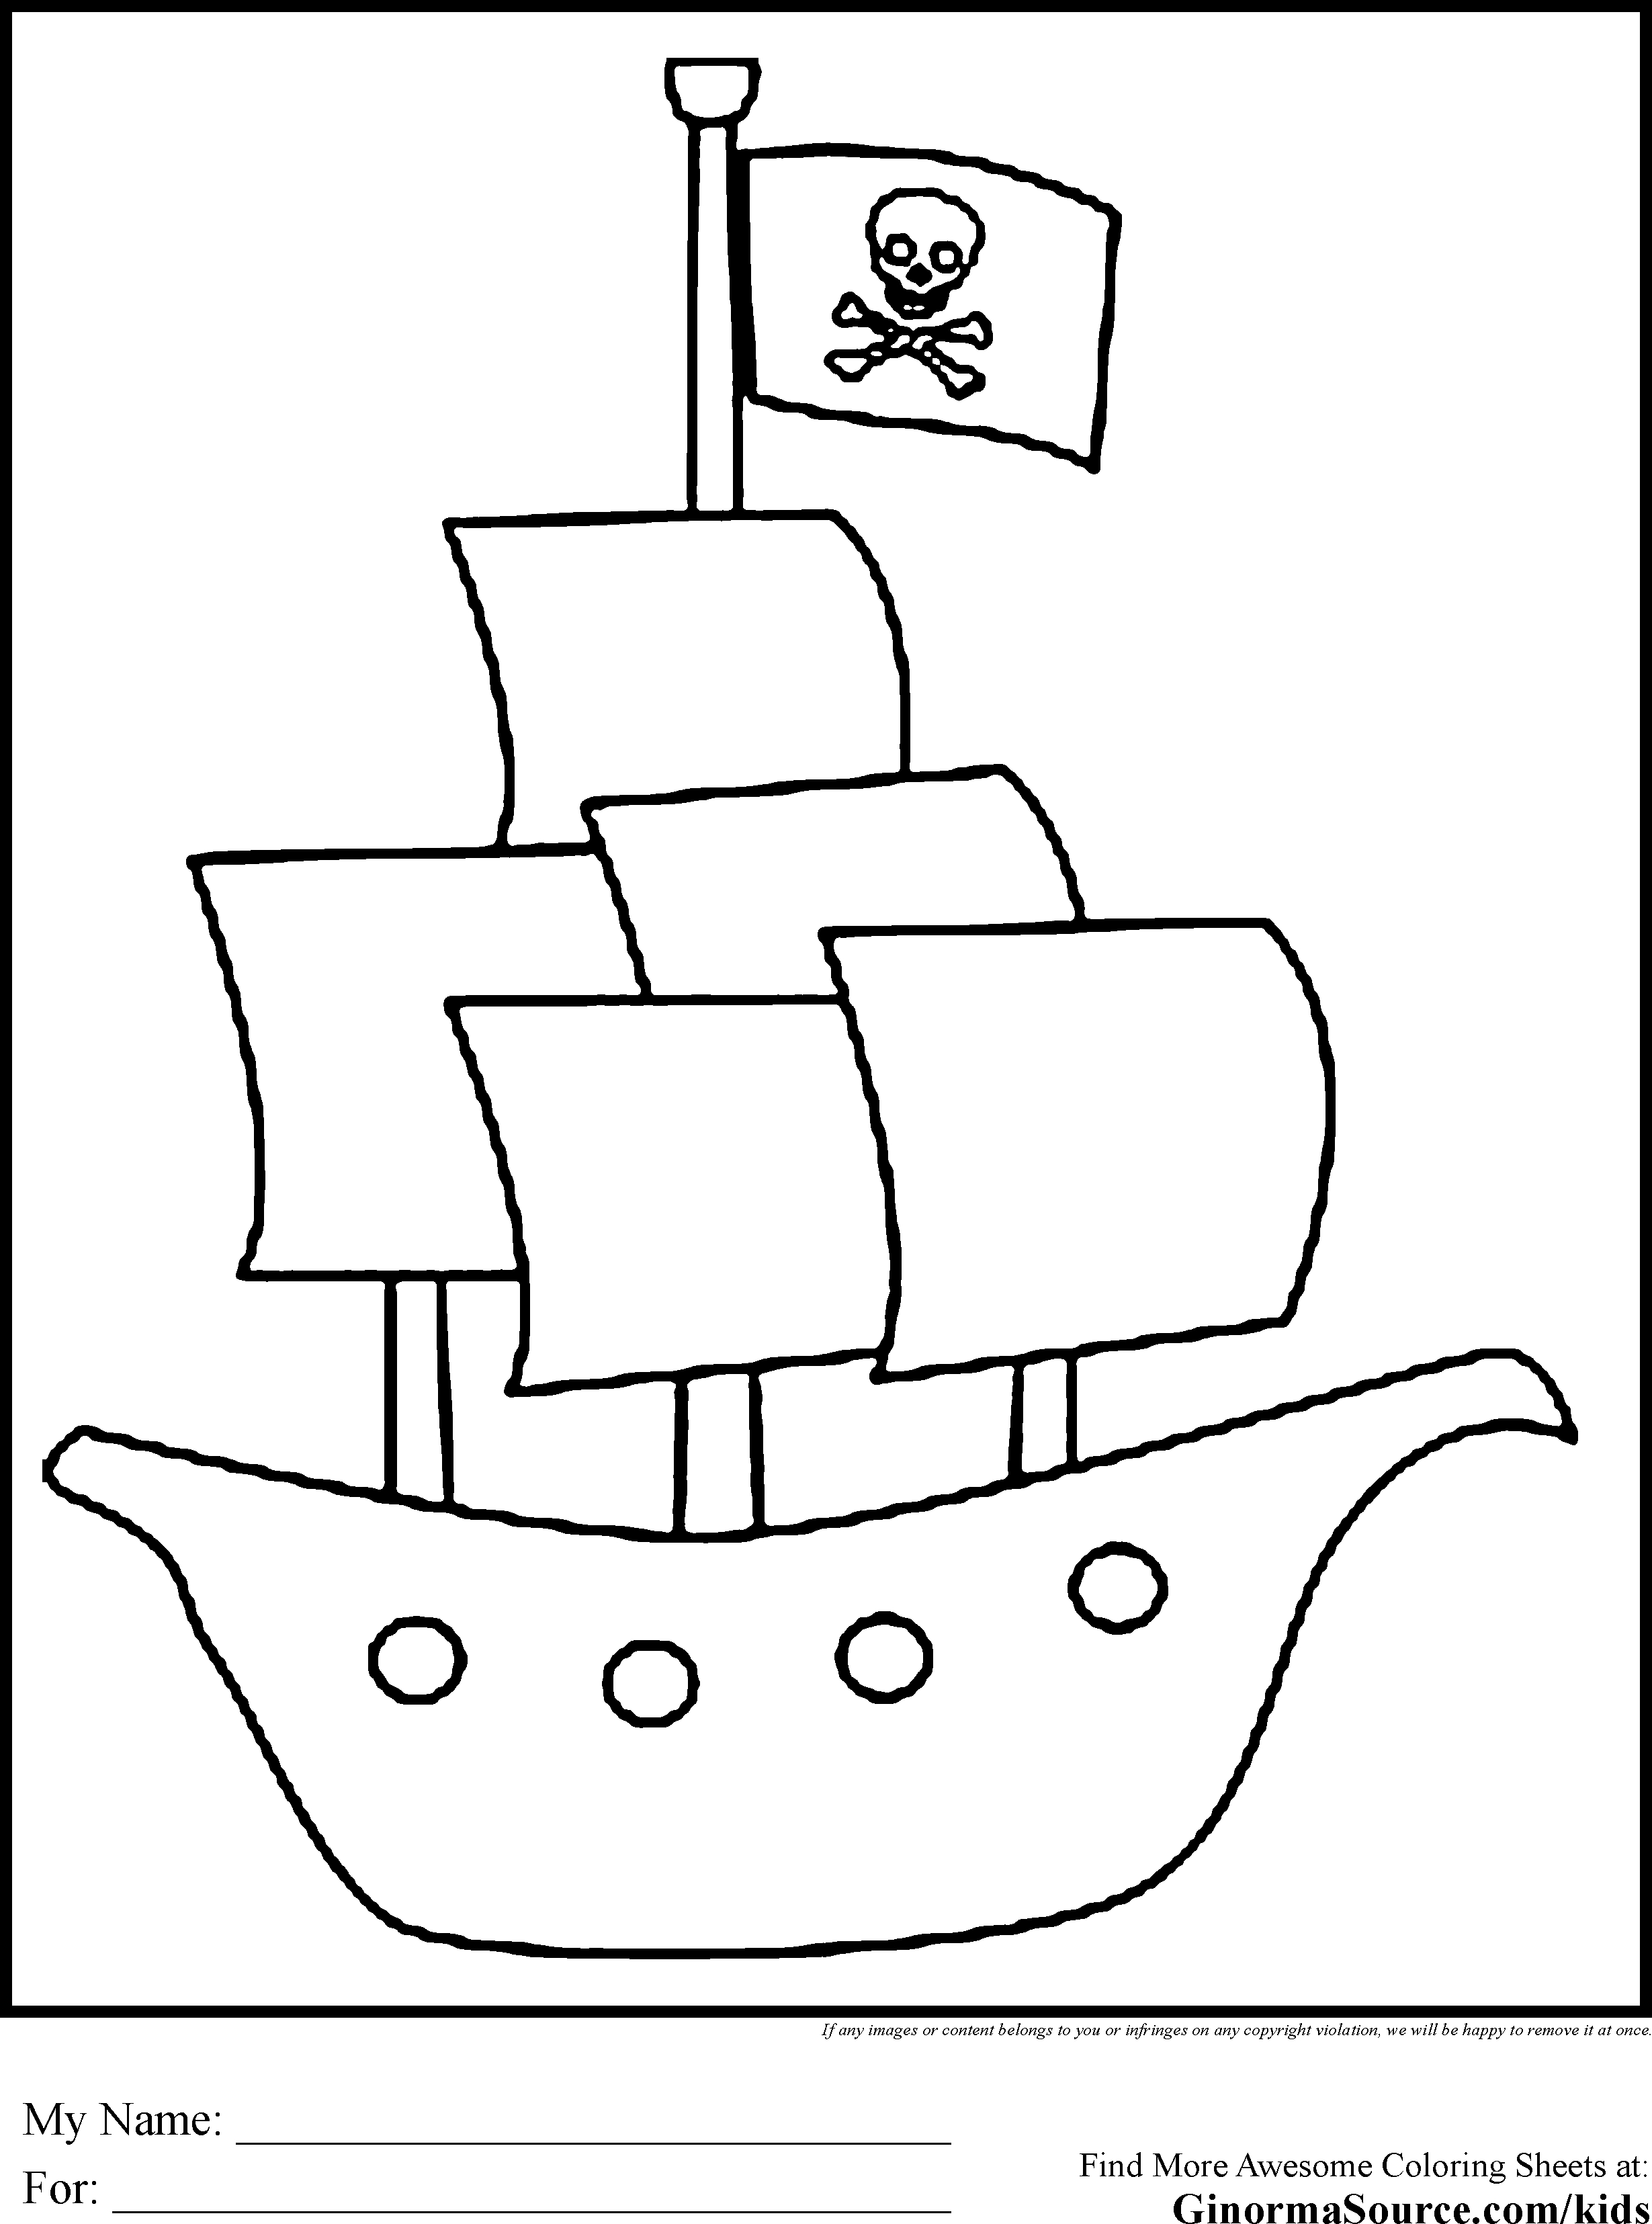 Columbus Ships Coloring Pages Pirate Ship Coloring Page Pages Best Free Coloring Pages Site